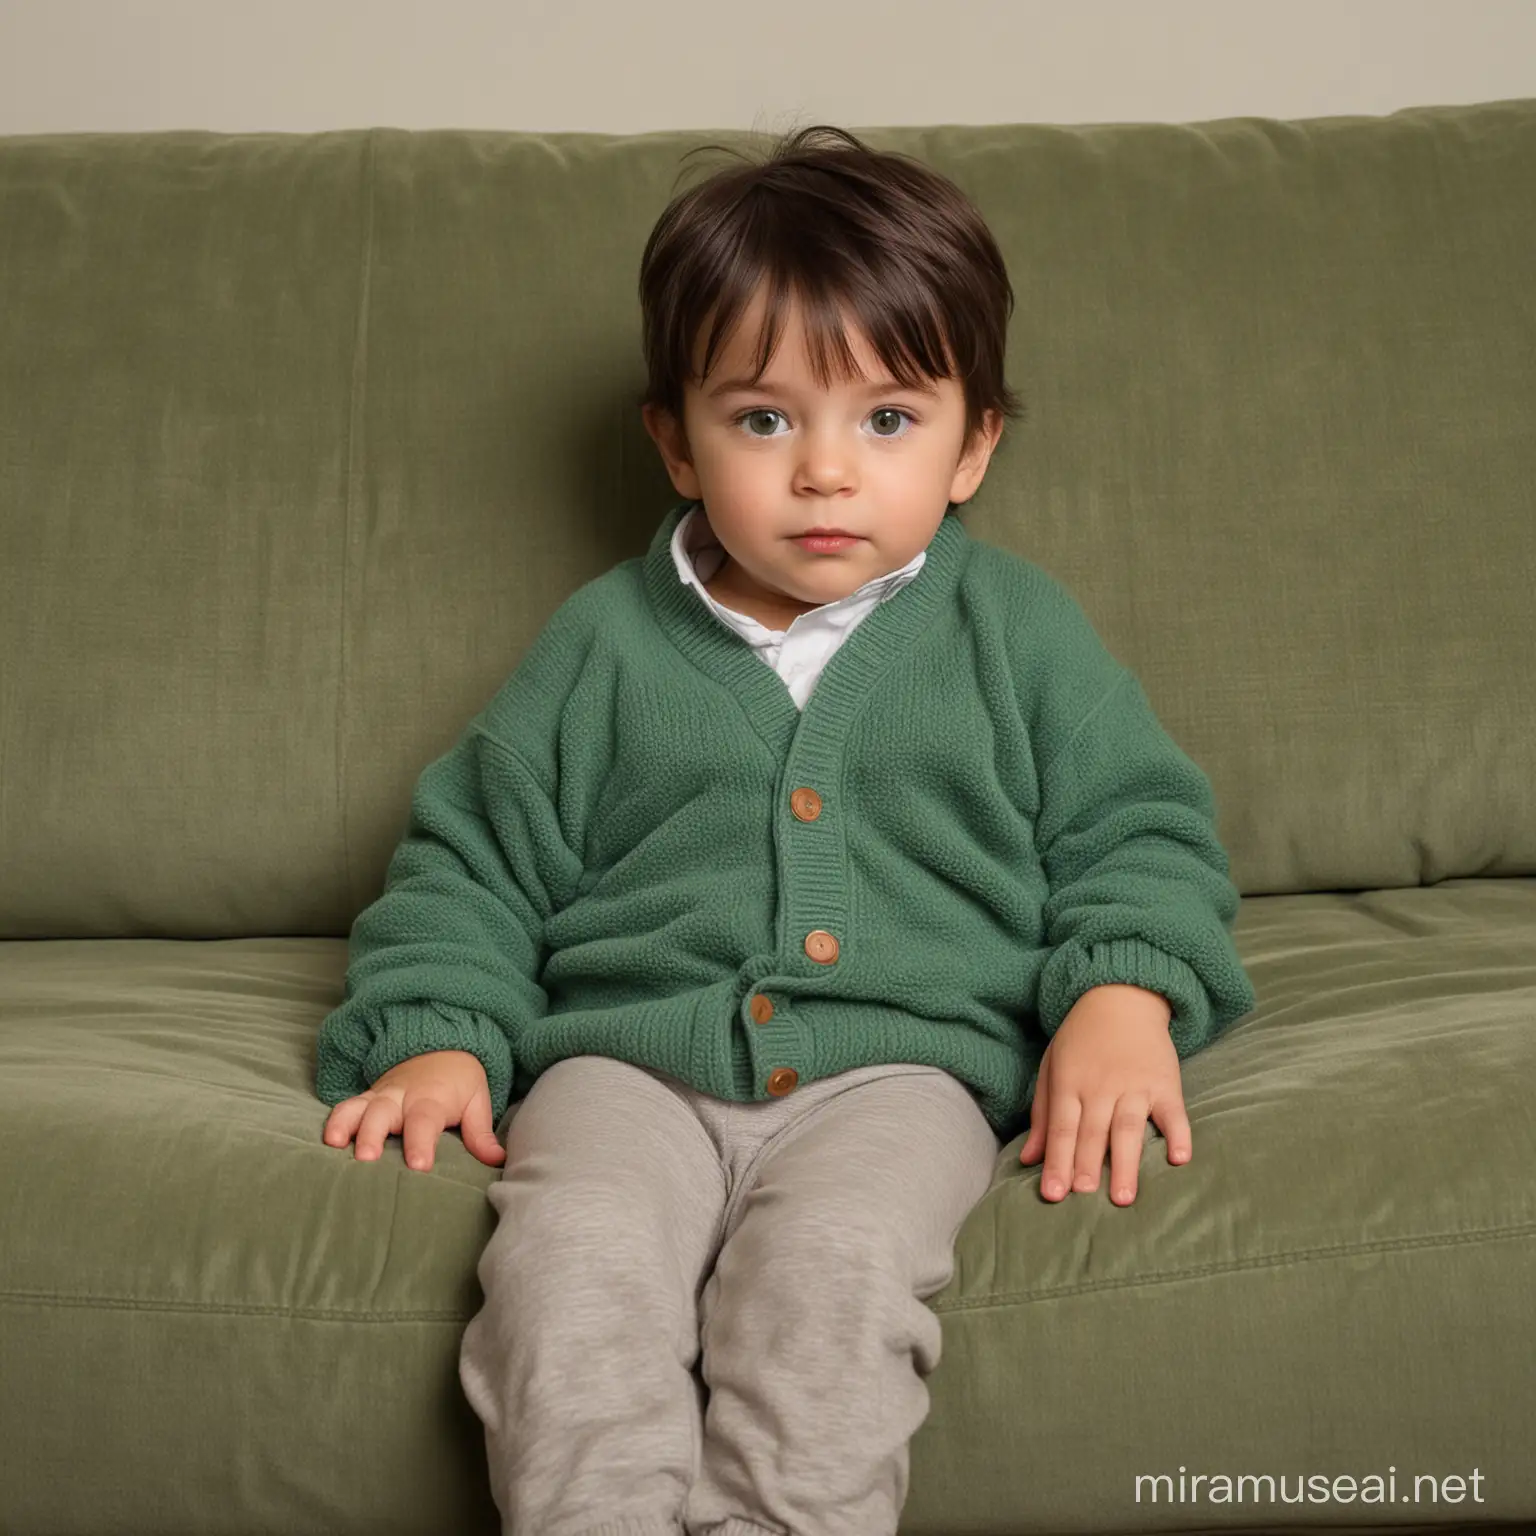 A little boy around the age of three years old, relaxing on the couch. He is wearing a cozy outfit. he had dark hair and green eyes.